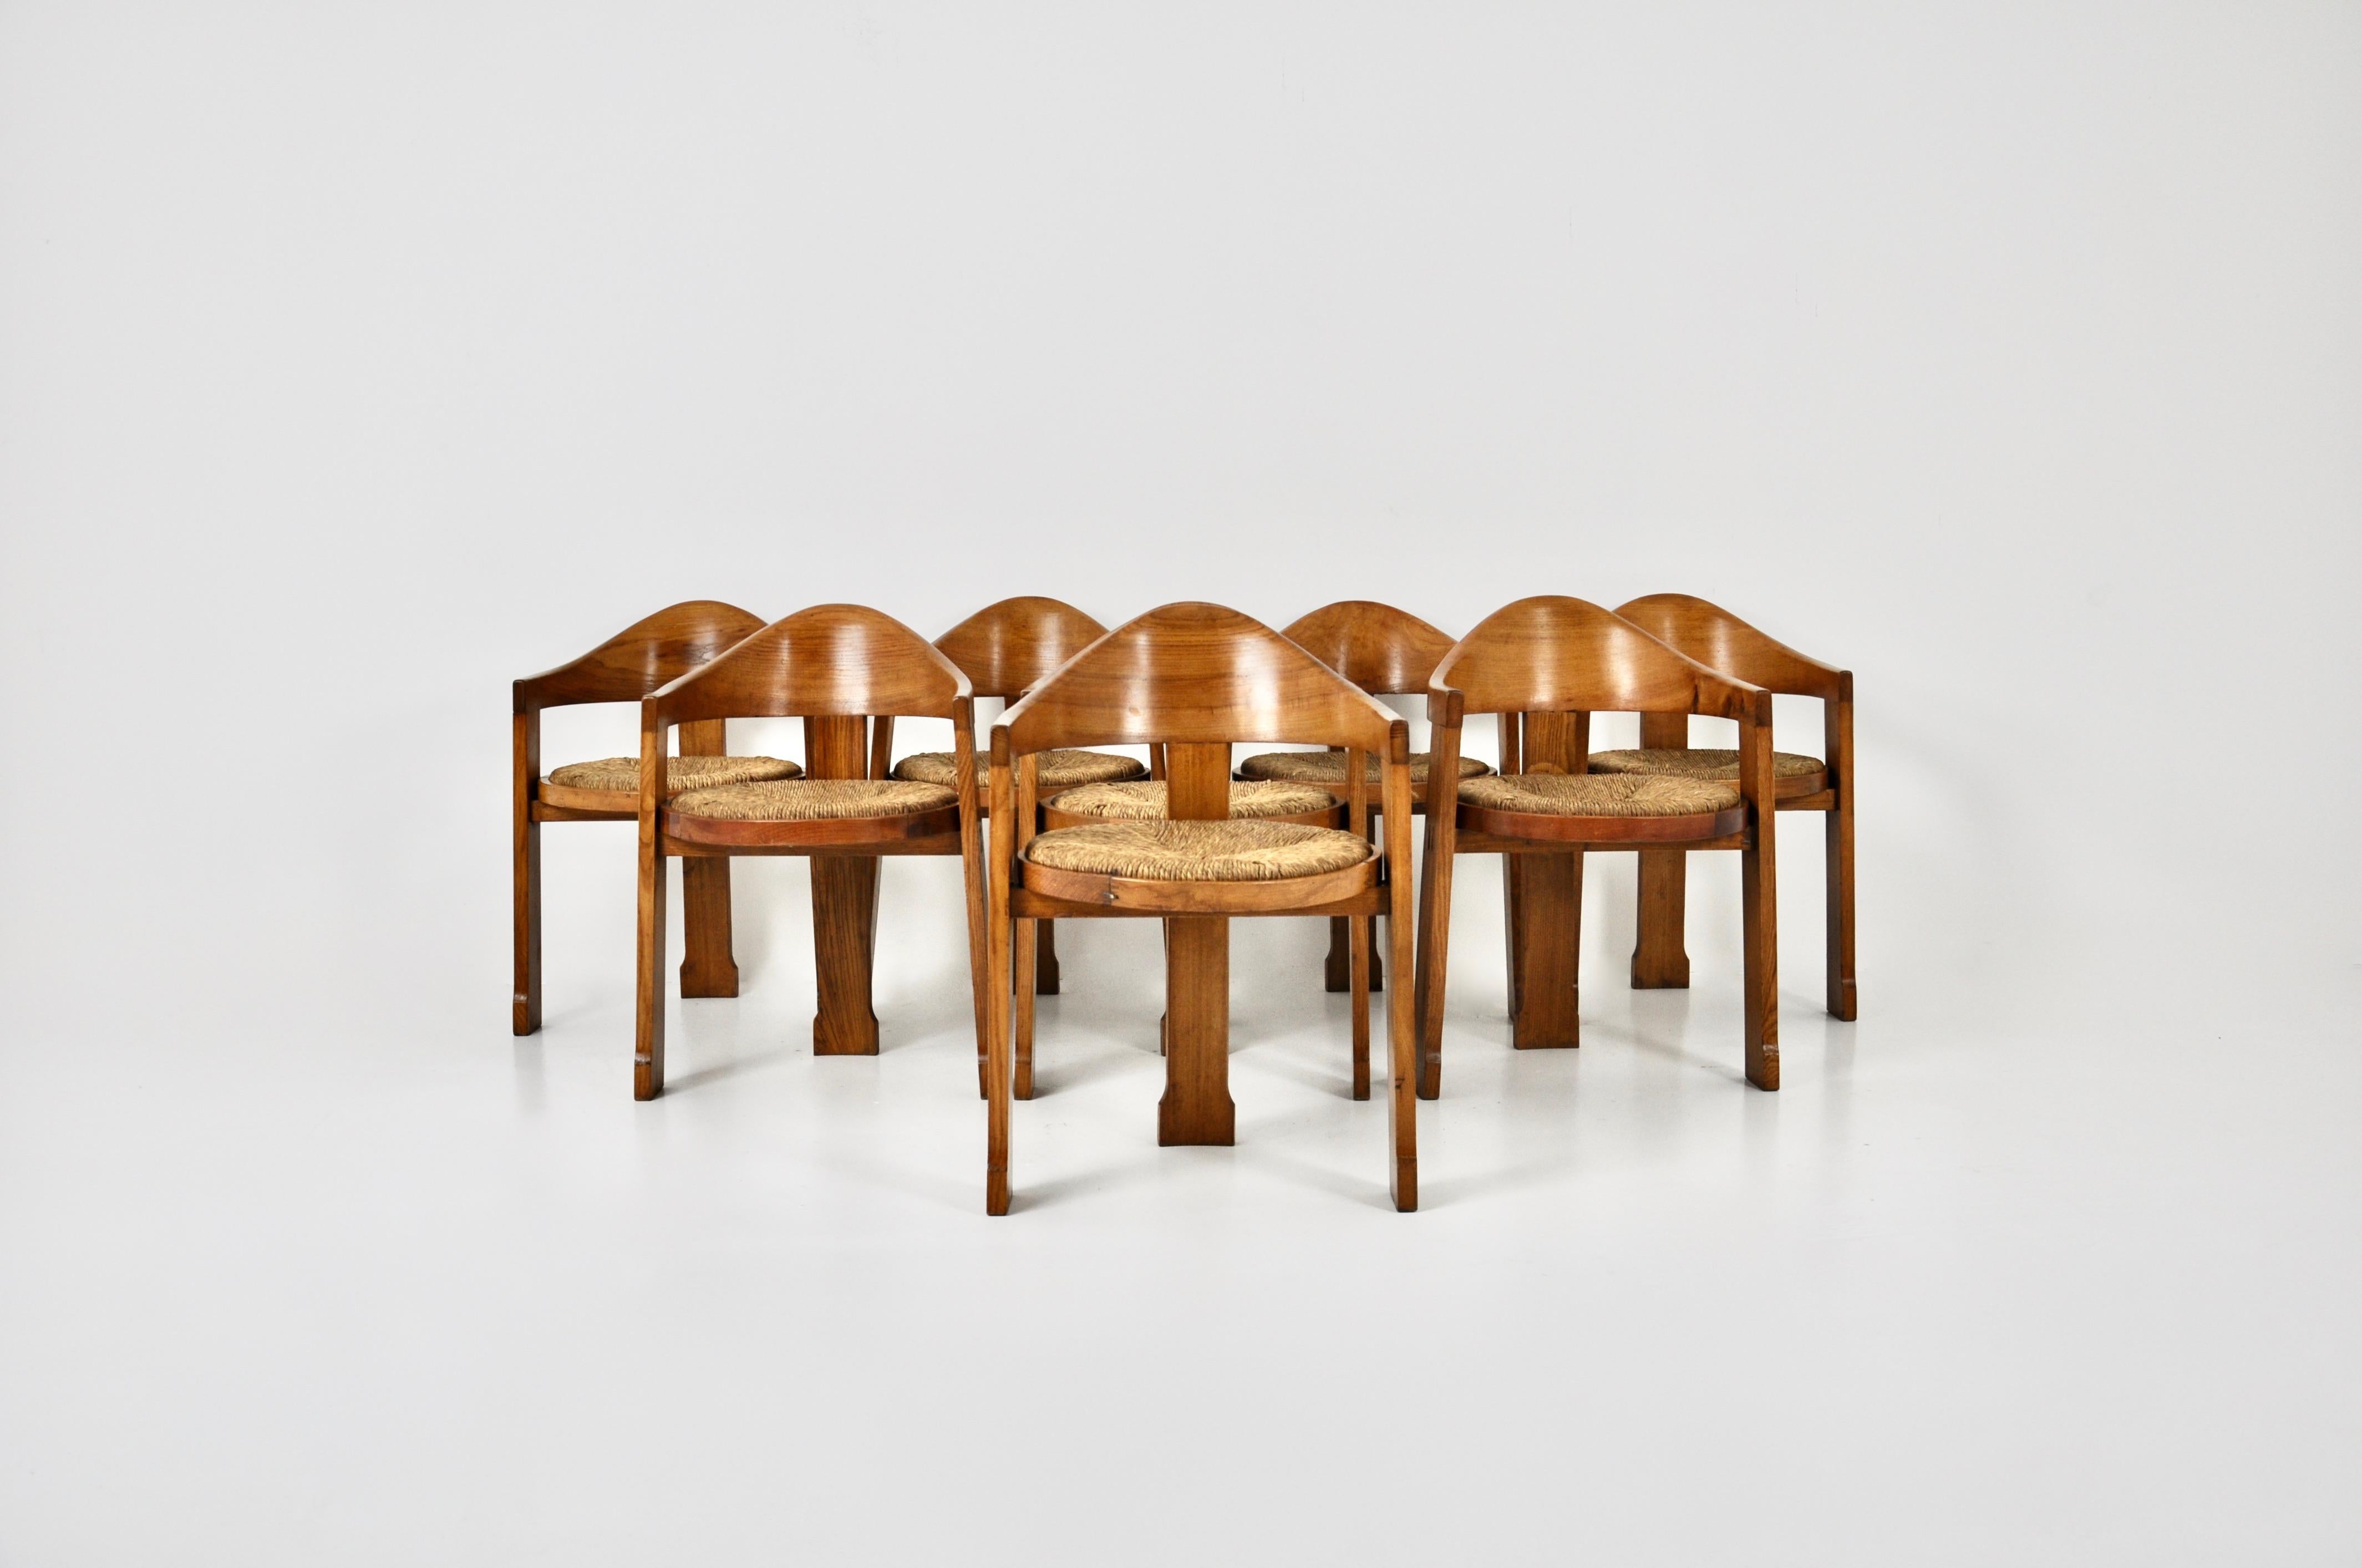 Set of 8 wooden chairs with wicker seat. Seat height: 45 cm. Wear due to age and time of chairs.